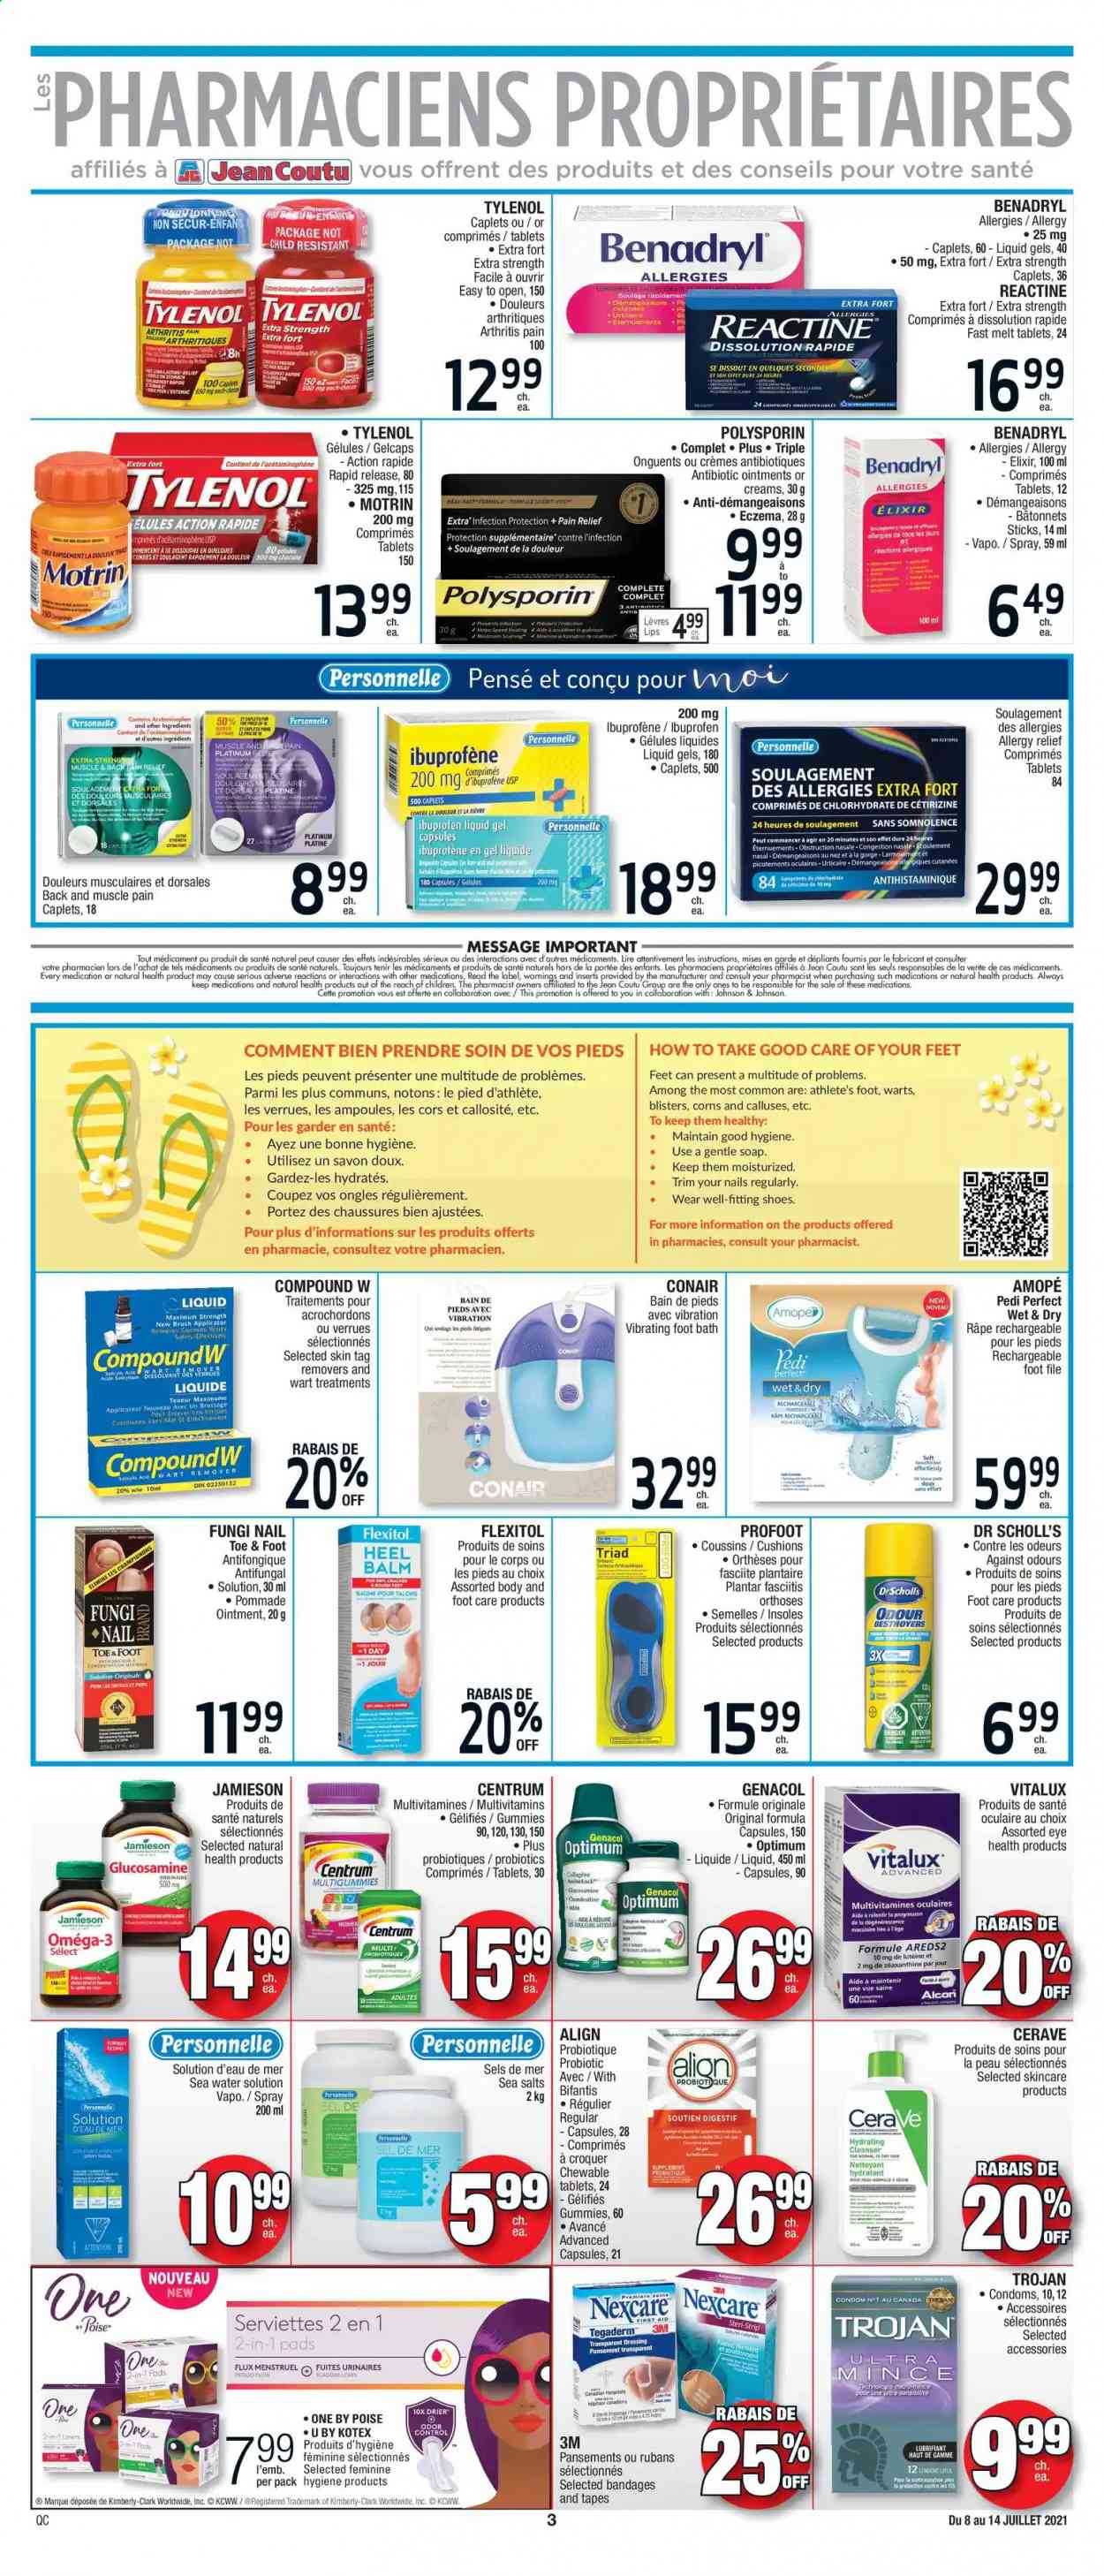 thumbnail - Jean Coutu Flyer - July 08, 2021 - July 14, 2021 - Sales products - Johnson's, ointment, soap, Kotex, CeraVe, cleanser, condom, foot care, pin, presenter, deco strips, cushion, shoes, Dr. Scholl's, pain relief, glucosamine, Tylenol, Ibuprofen, probiotics, Omega-3, Centrum, allergy relief, Motrin. Page 3.